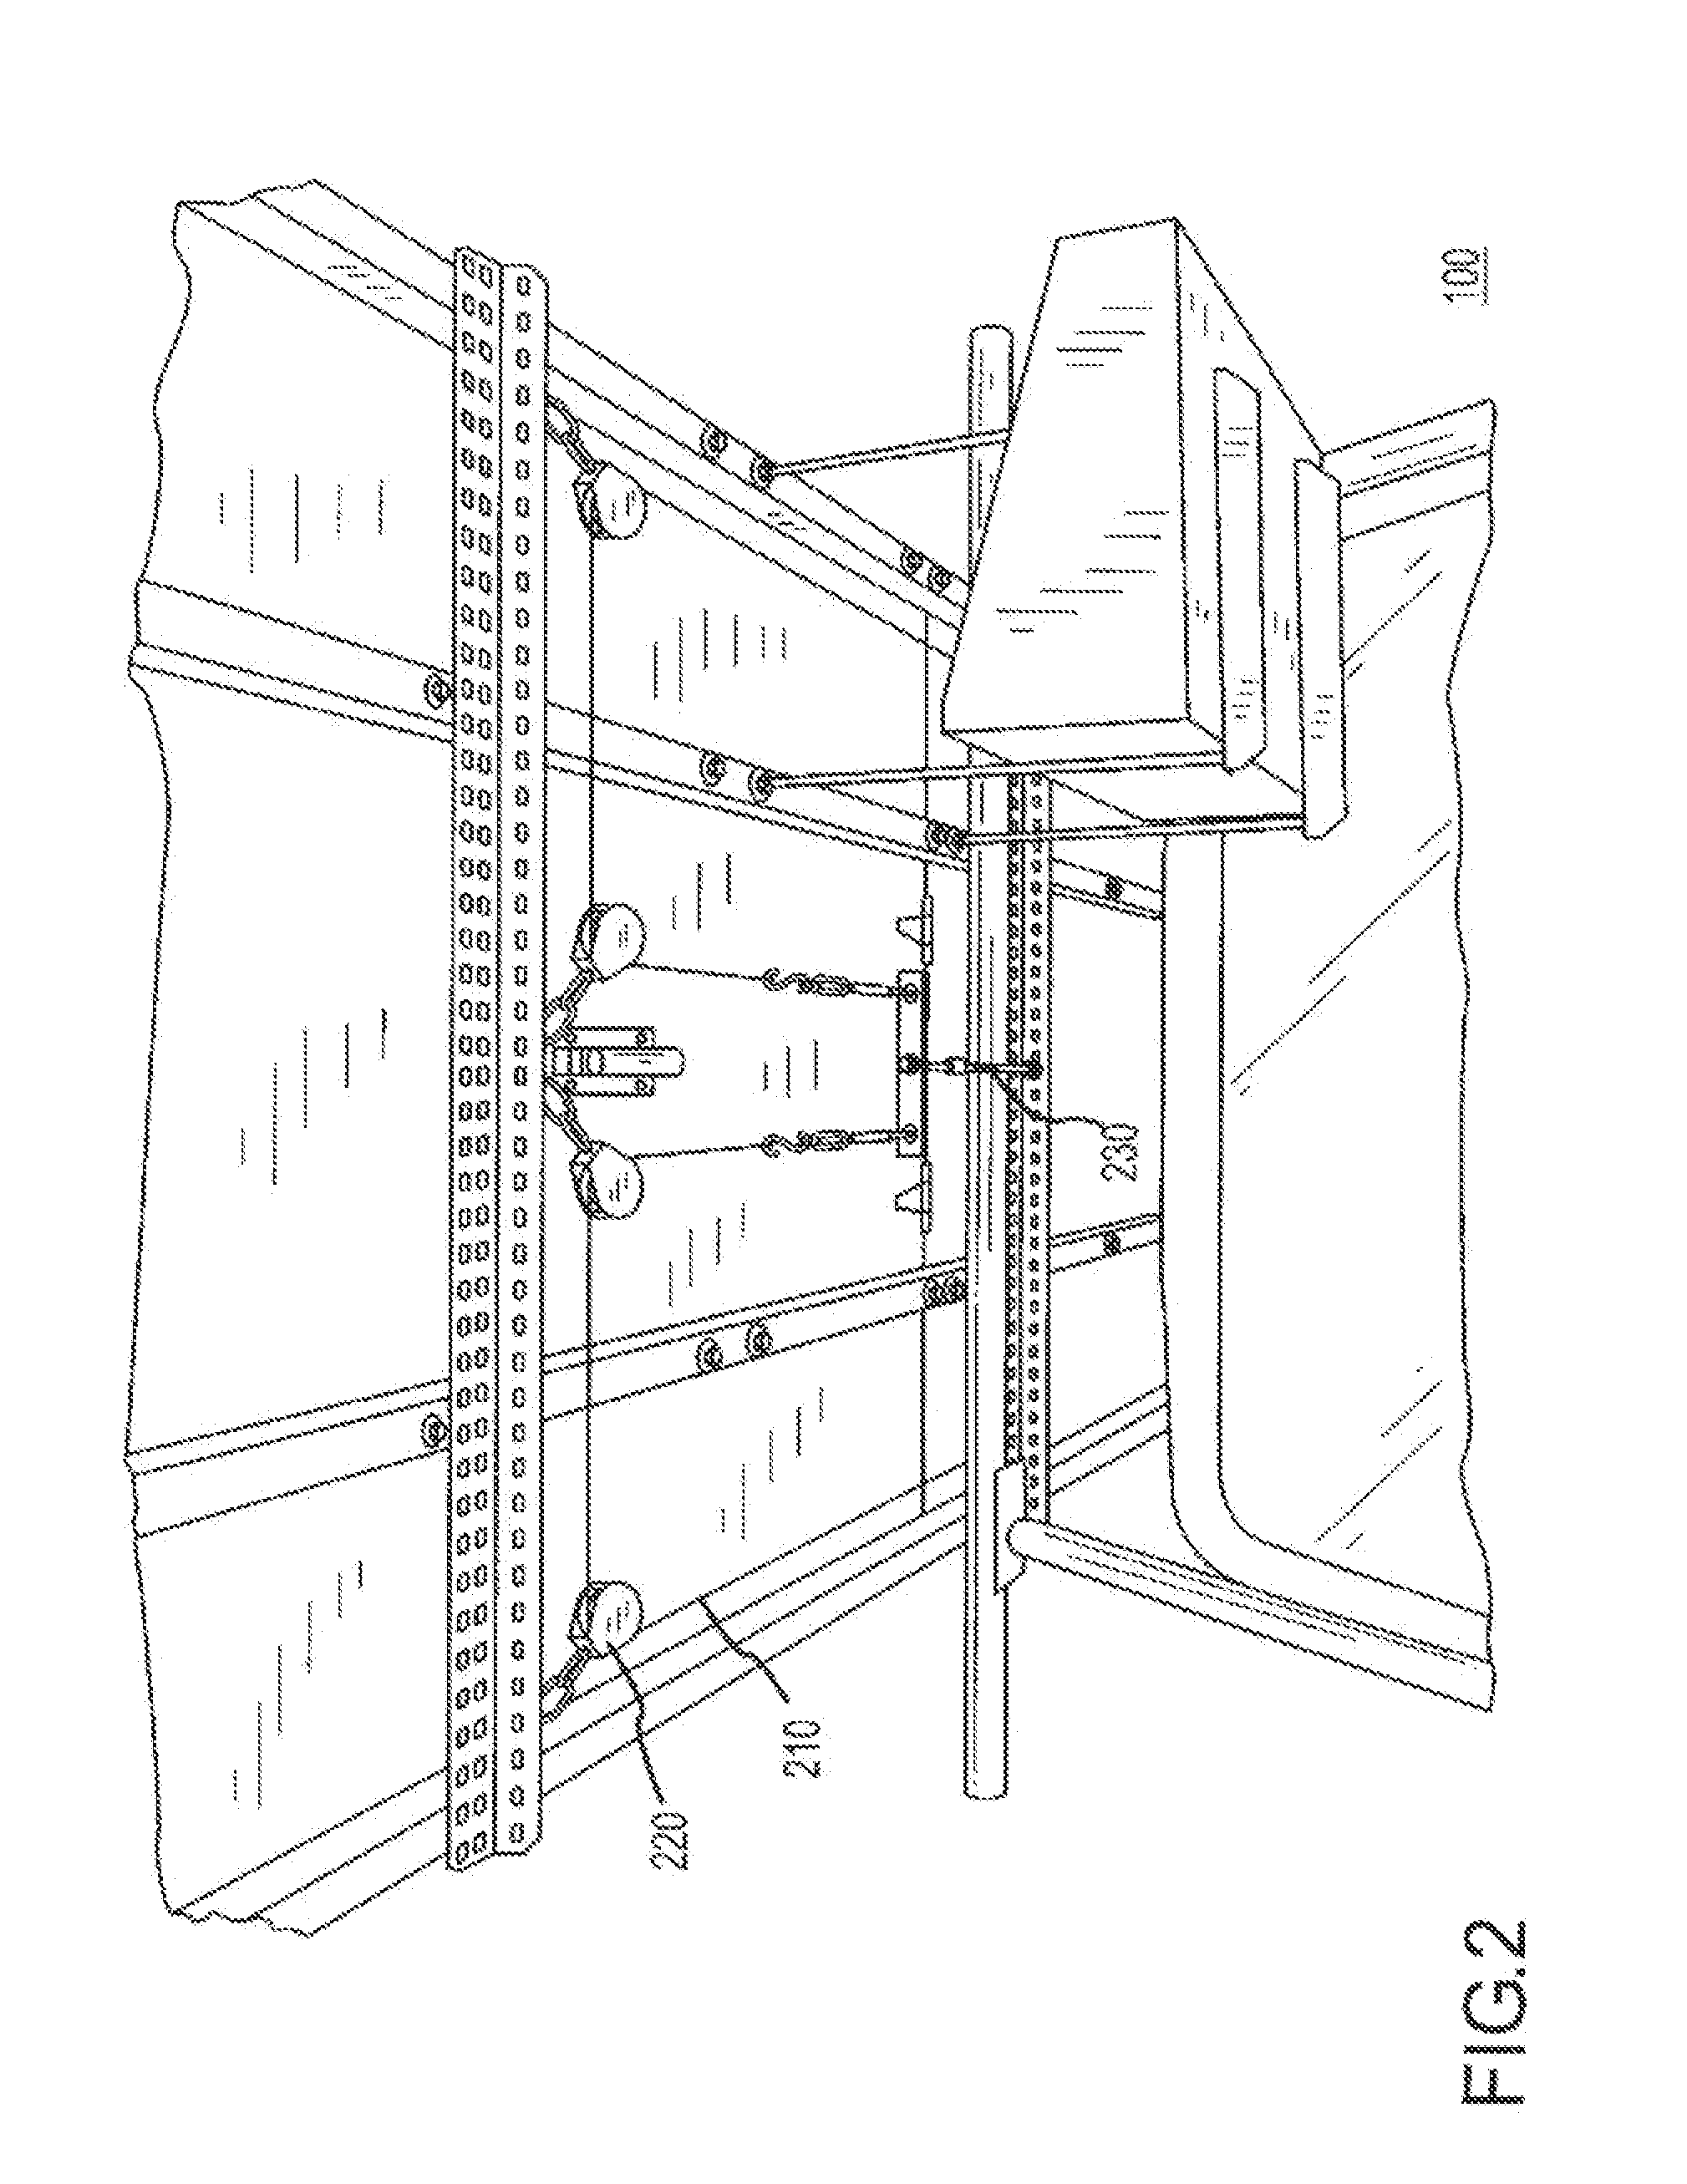 Aerial vehicle launching system and method